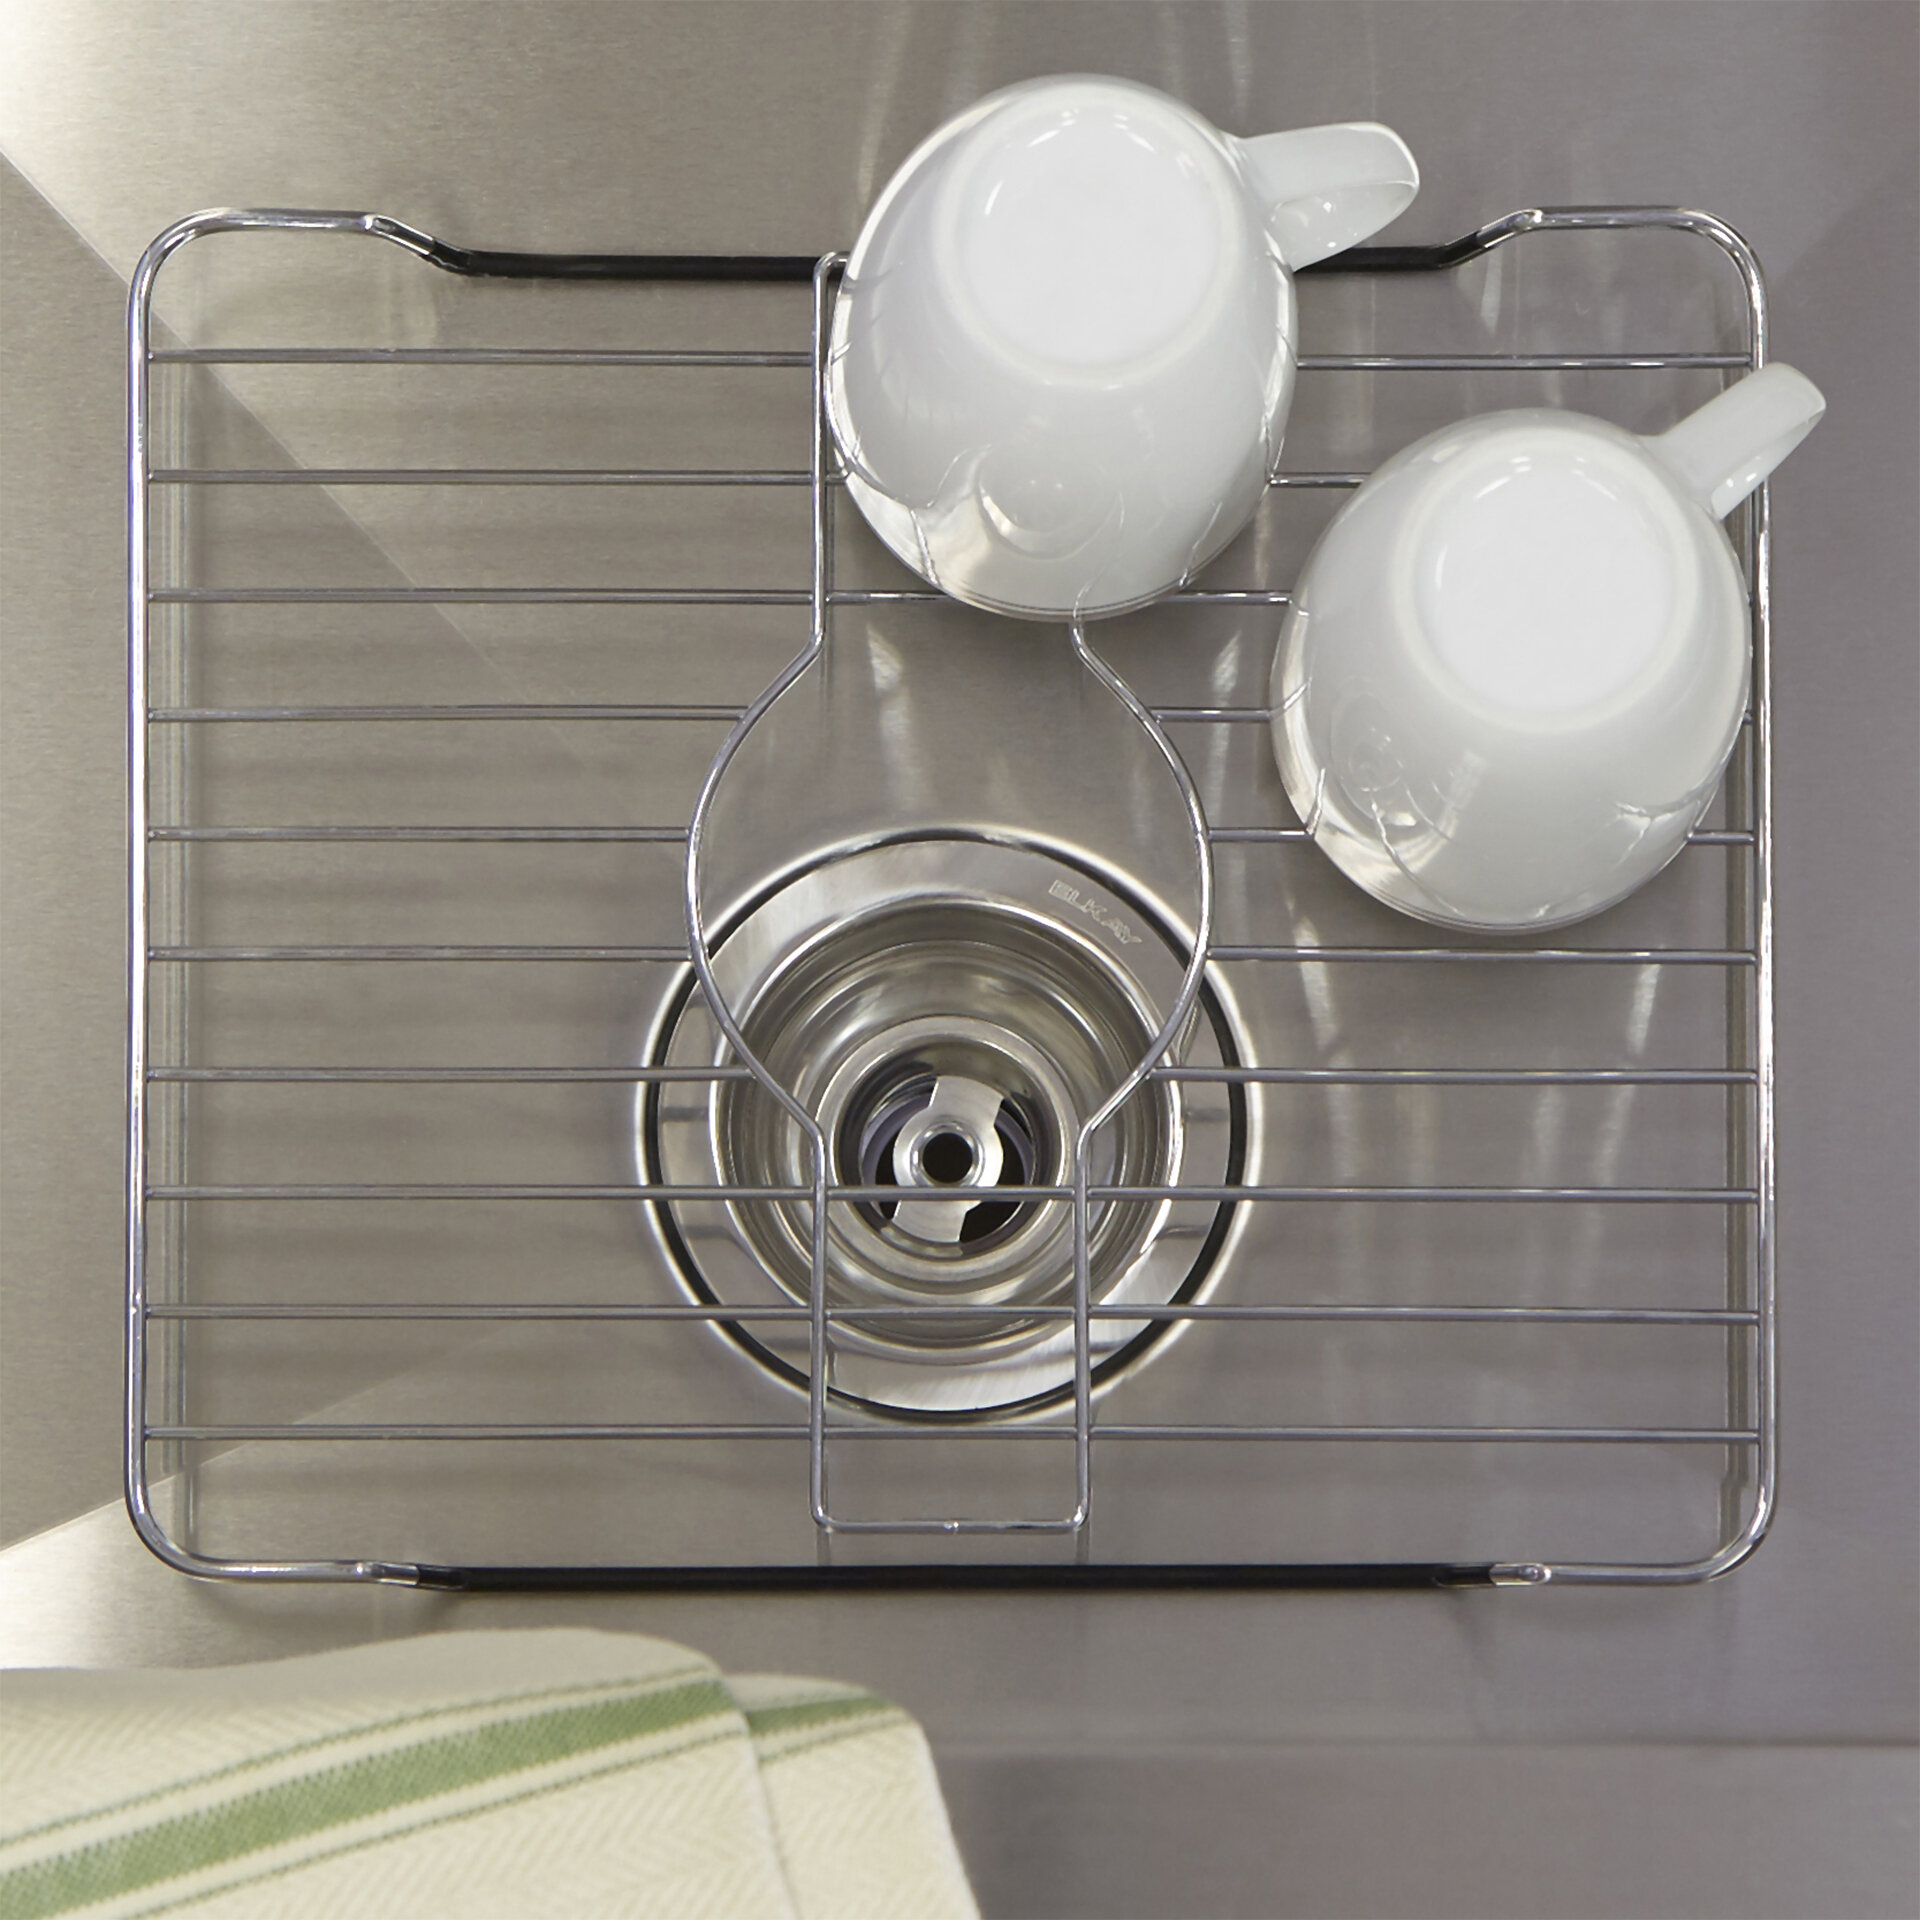 Sink Protectors For Kitchen Sink Sink Protector 13 X 16 Details about    LQS Kitchen Sink Grid 